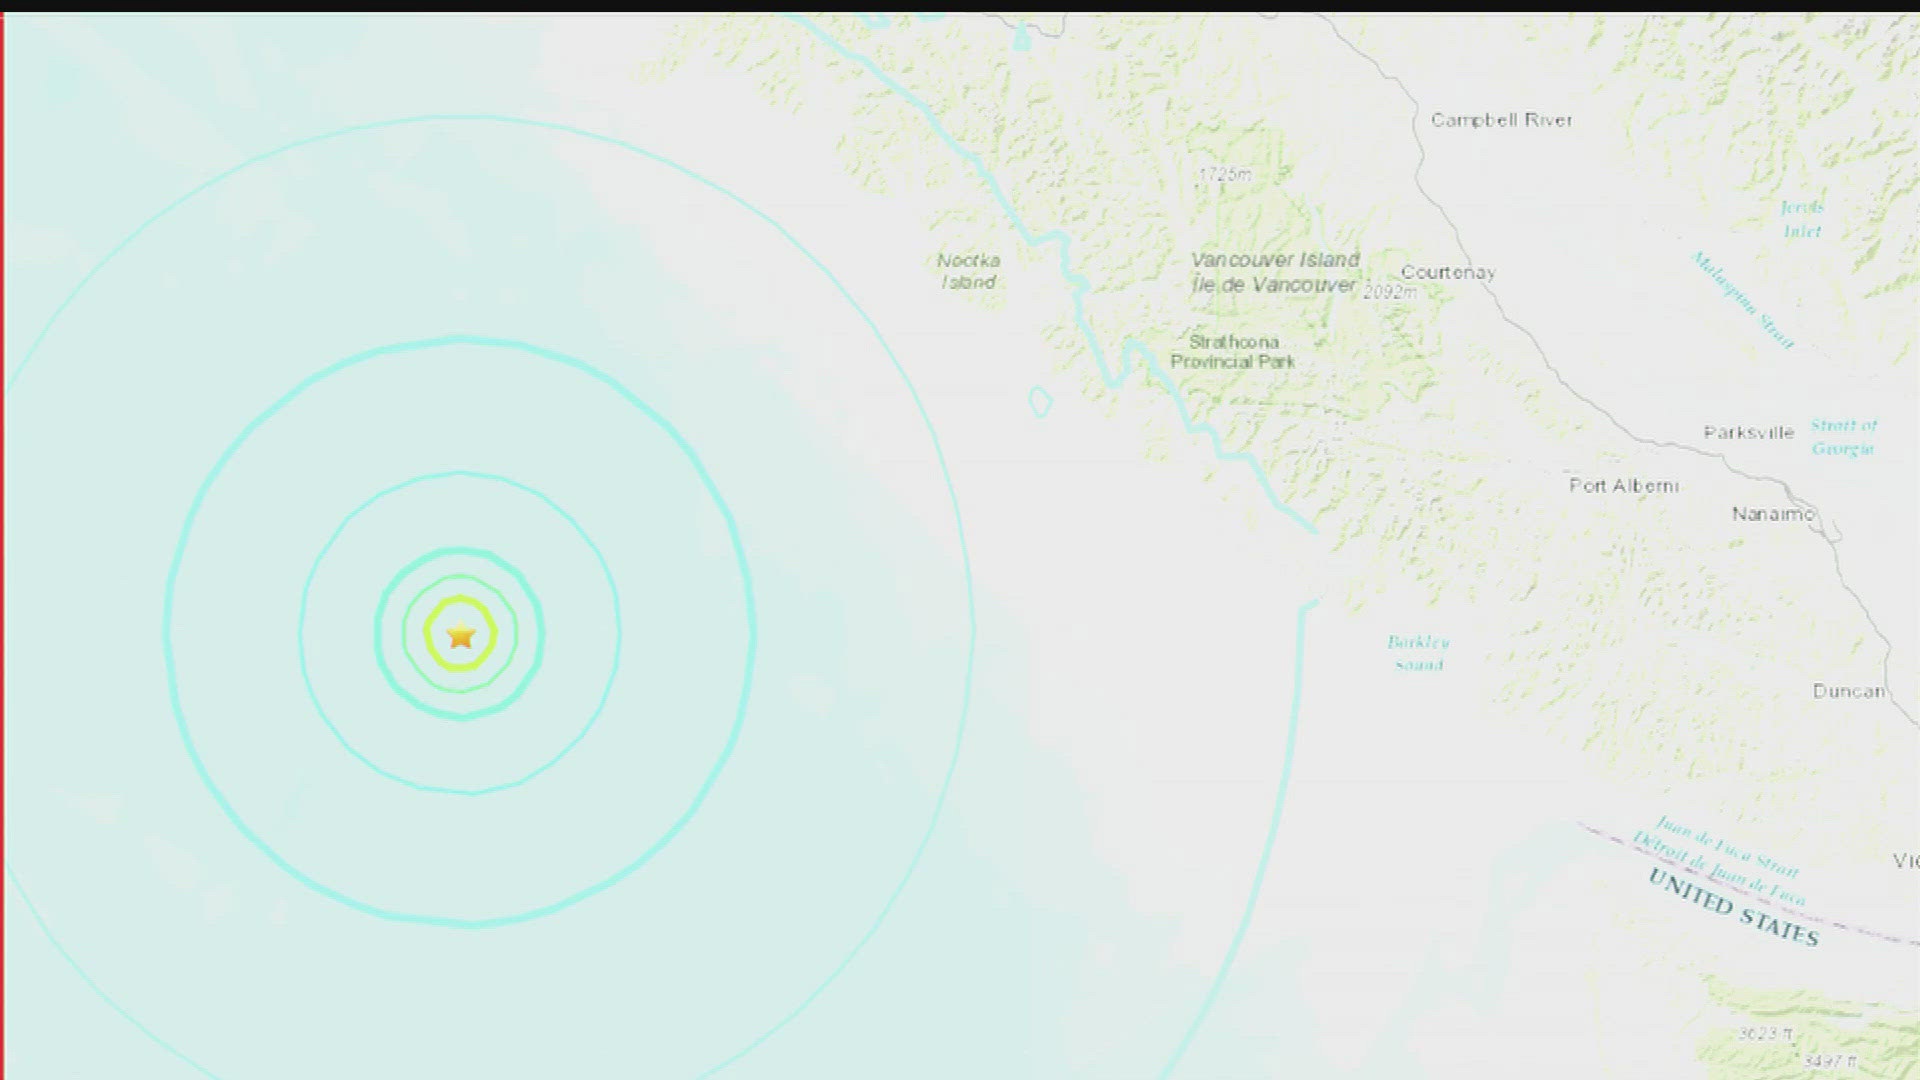 No tsunami risk is expected per the NWS, but some parts of western Washington got shake alerts from the earthquake.